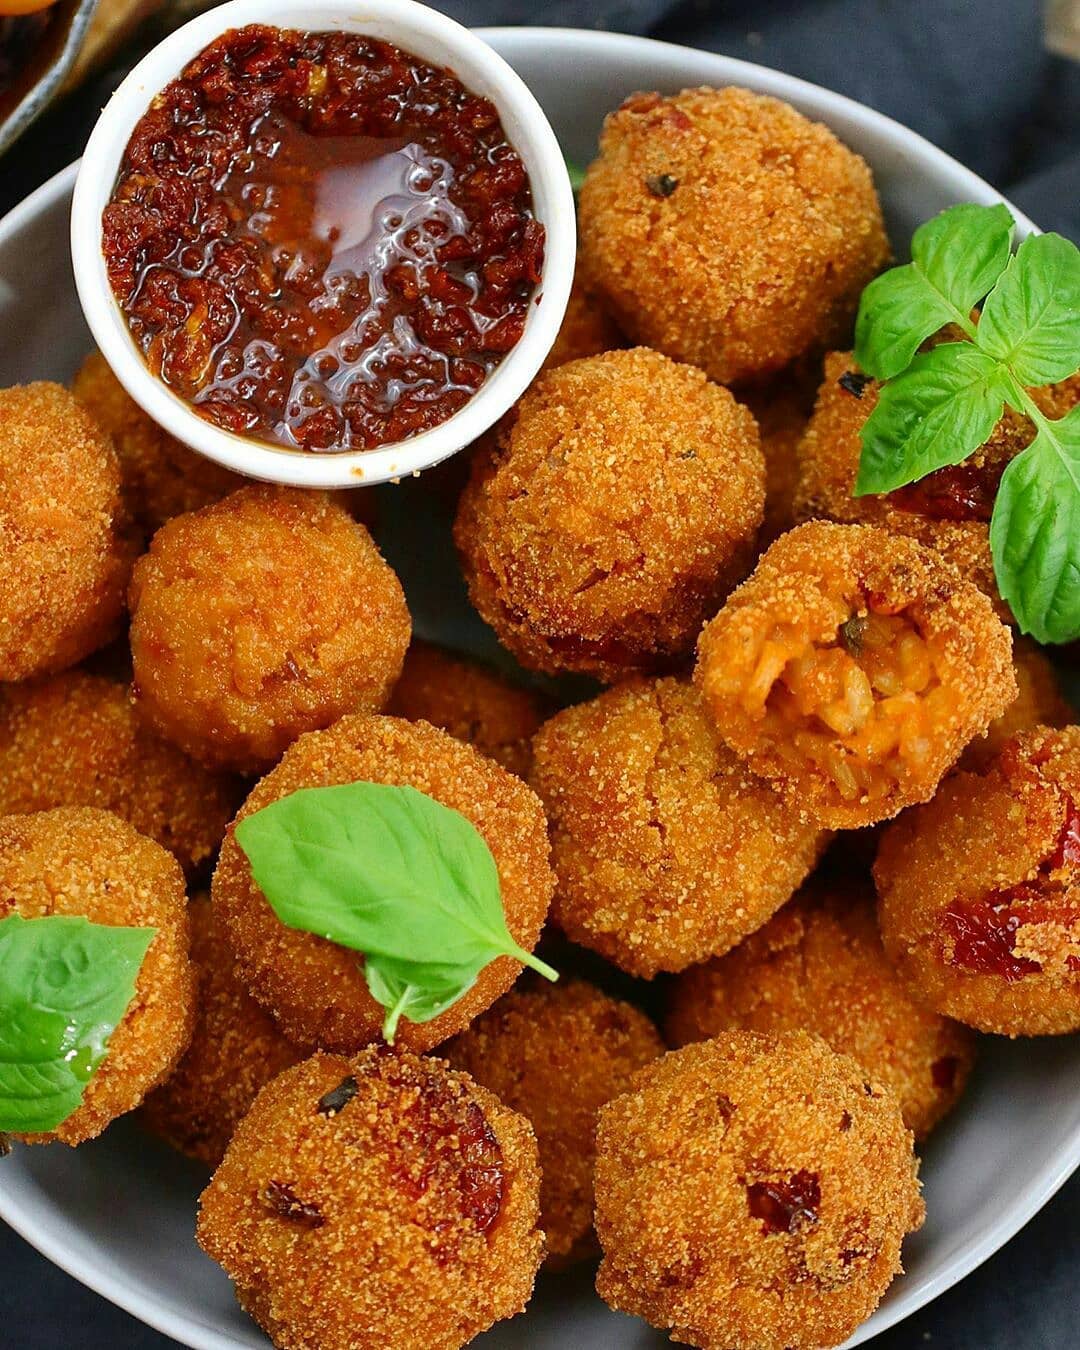 Vegan Fried Risotto Balls with Dried Tomatoes